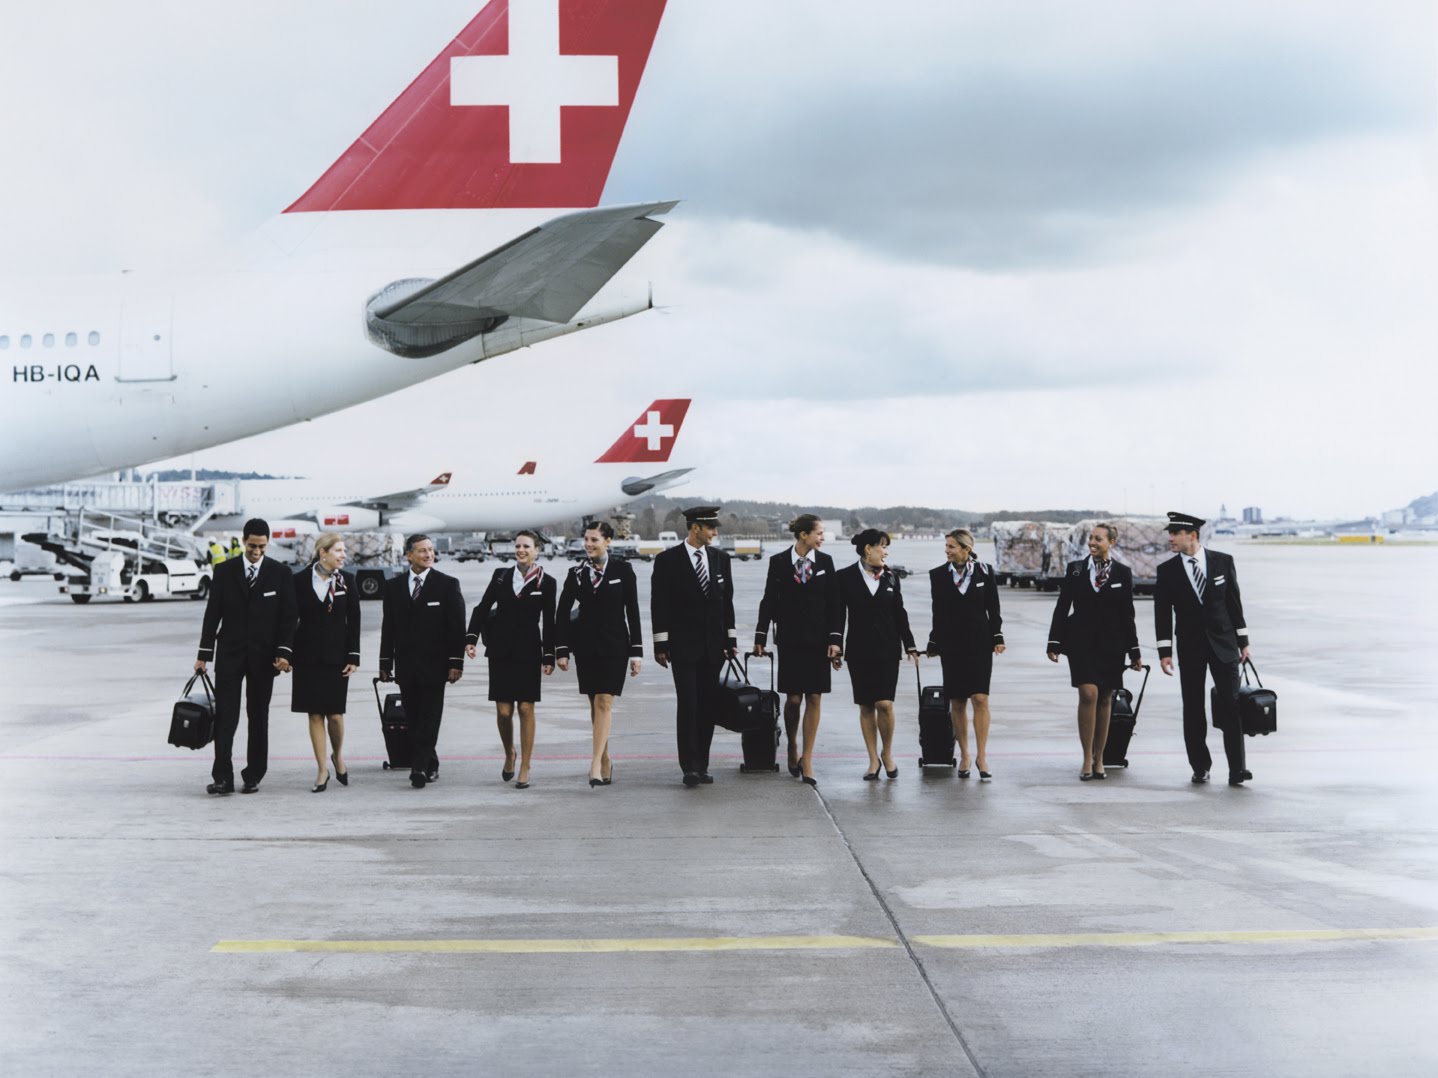 jet-airline: Swiss Airlines Cabin Crew